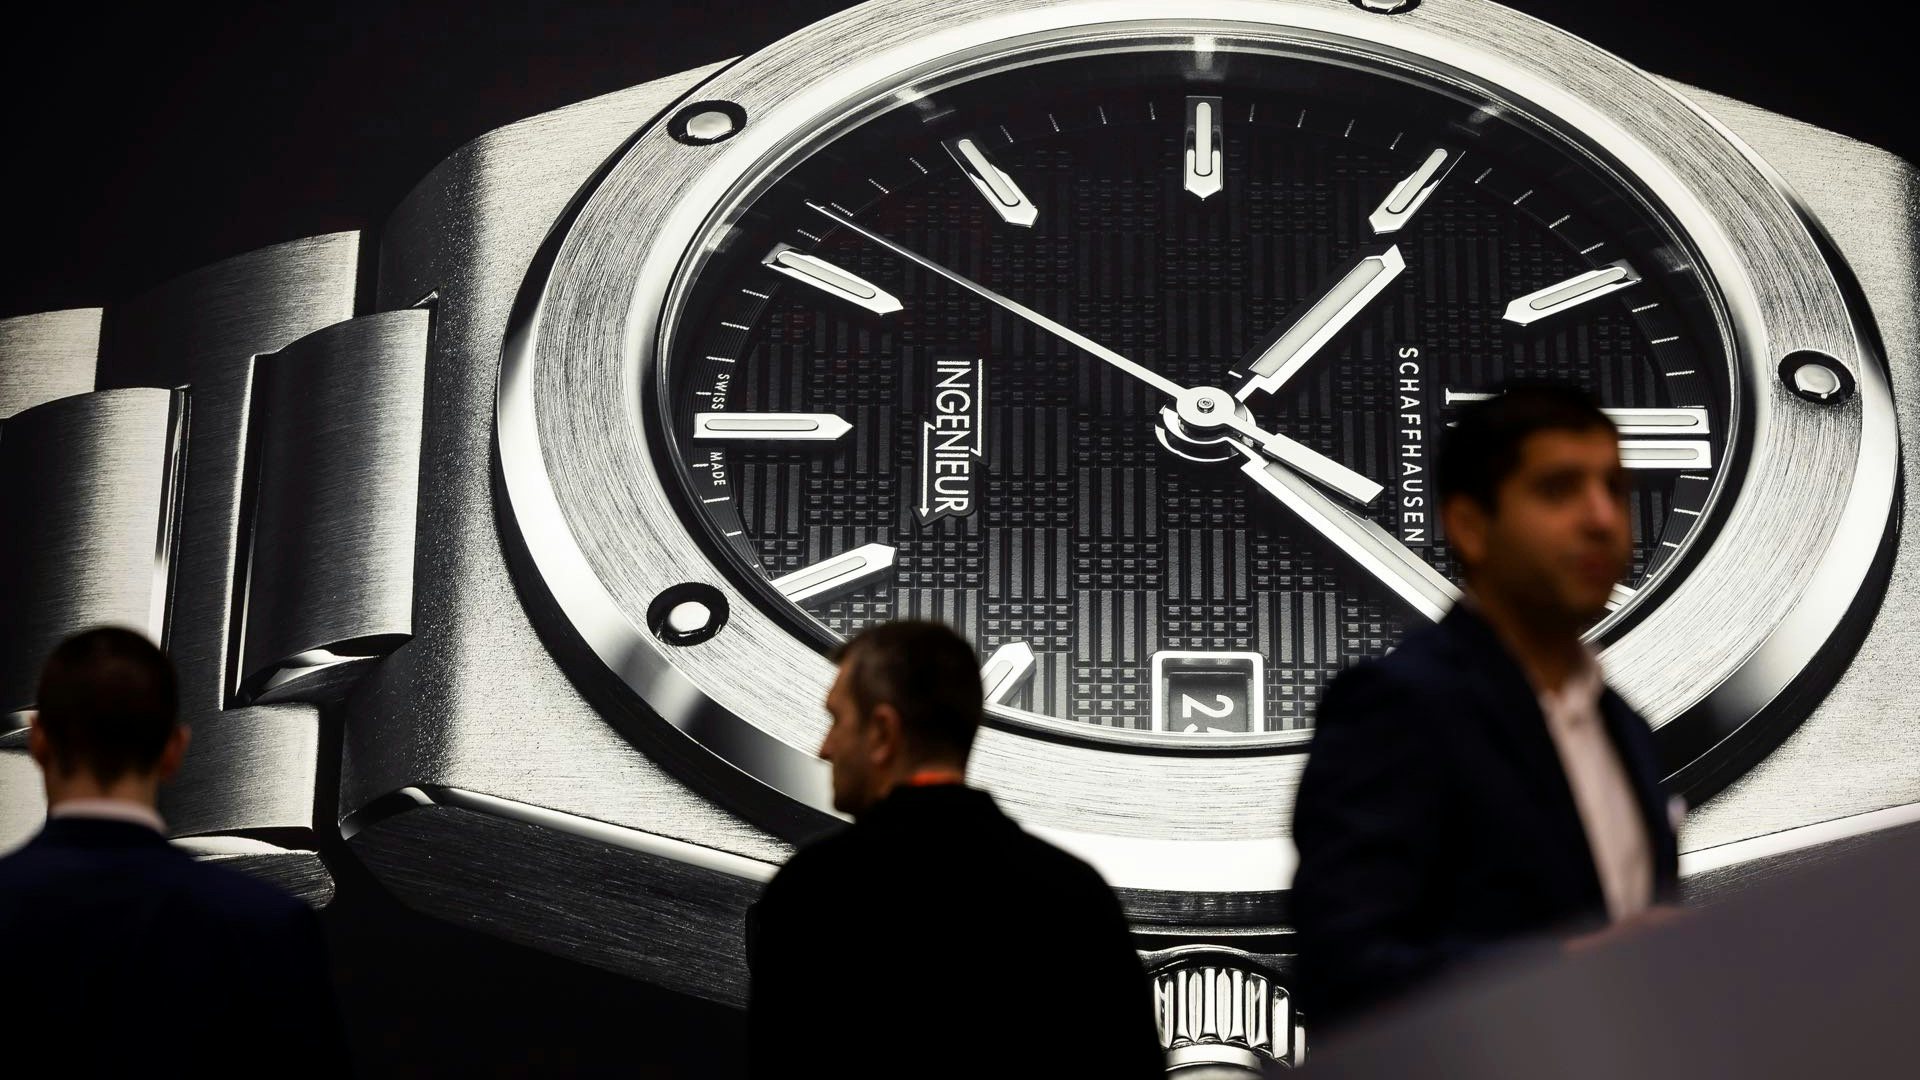 Watches and Wonders Geneva has emerged as the most significant gathering for the global watch industry. Here's how luxury brands engaged Chinese buyers. Photo: IWC